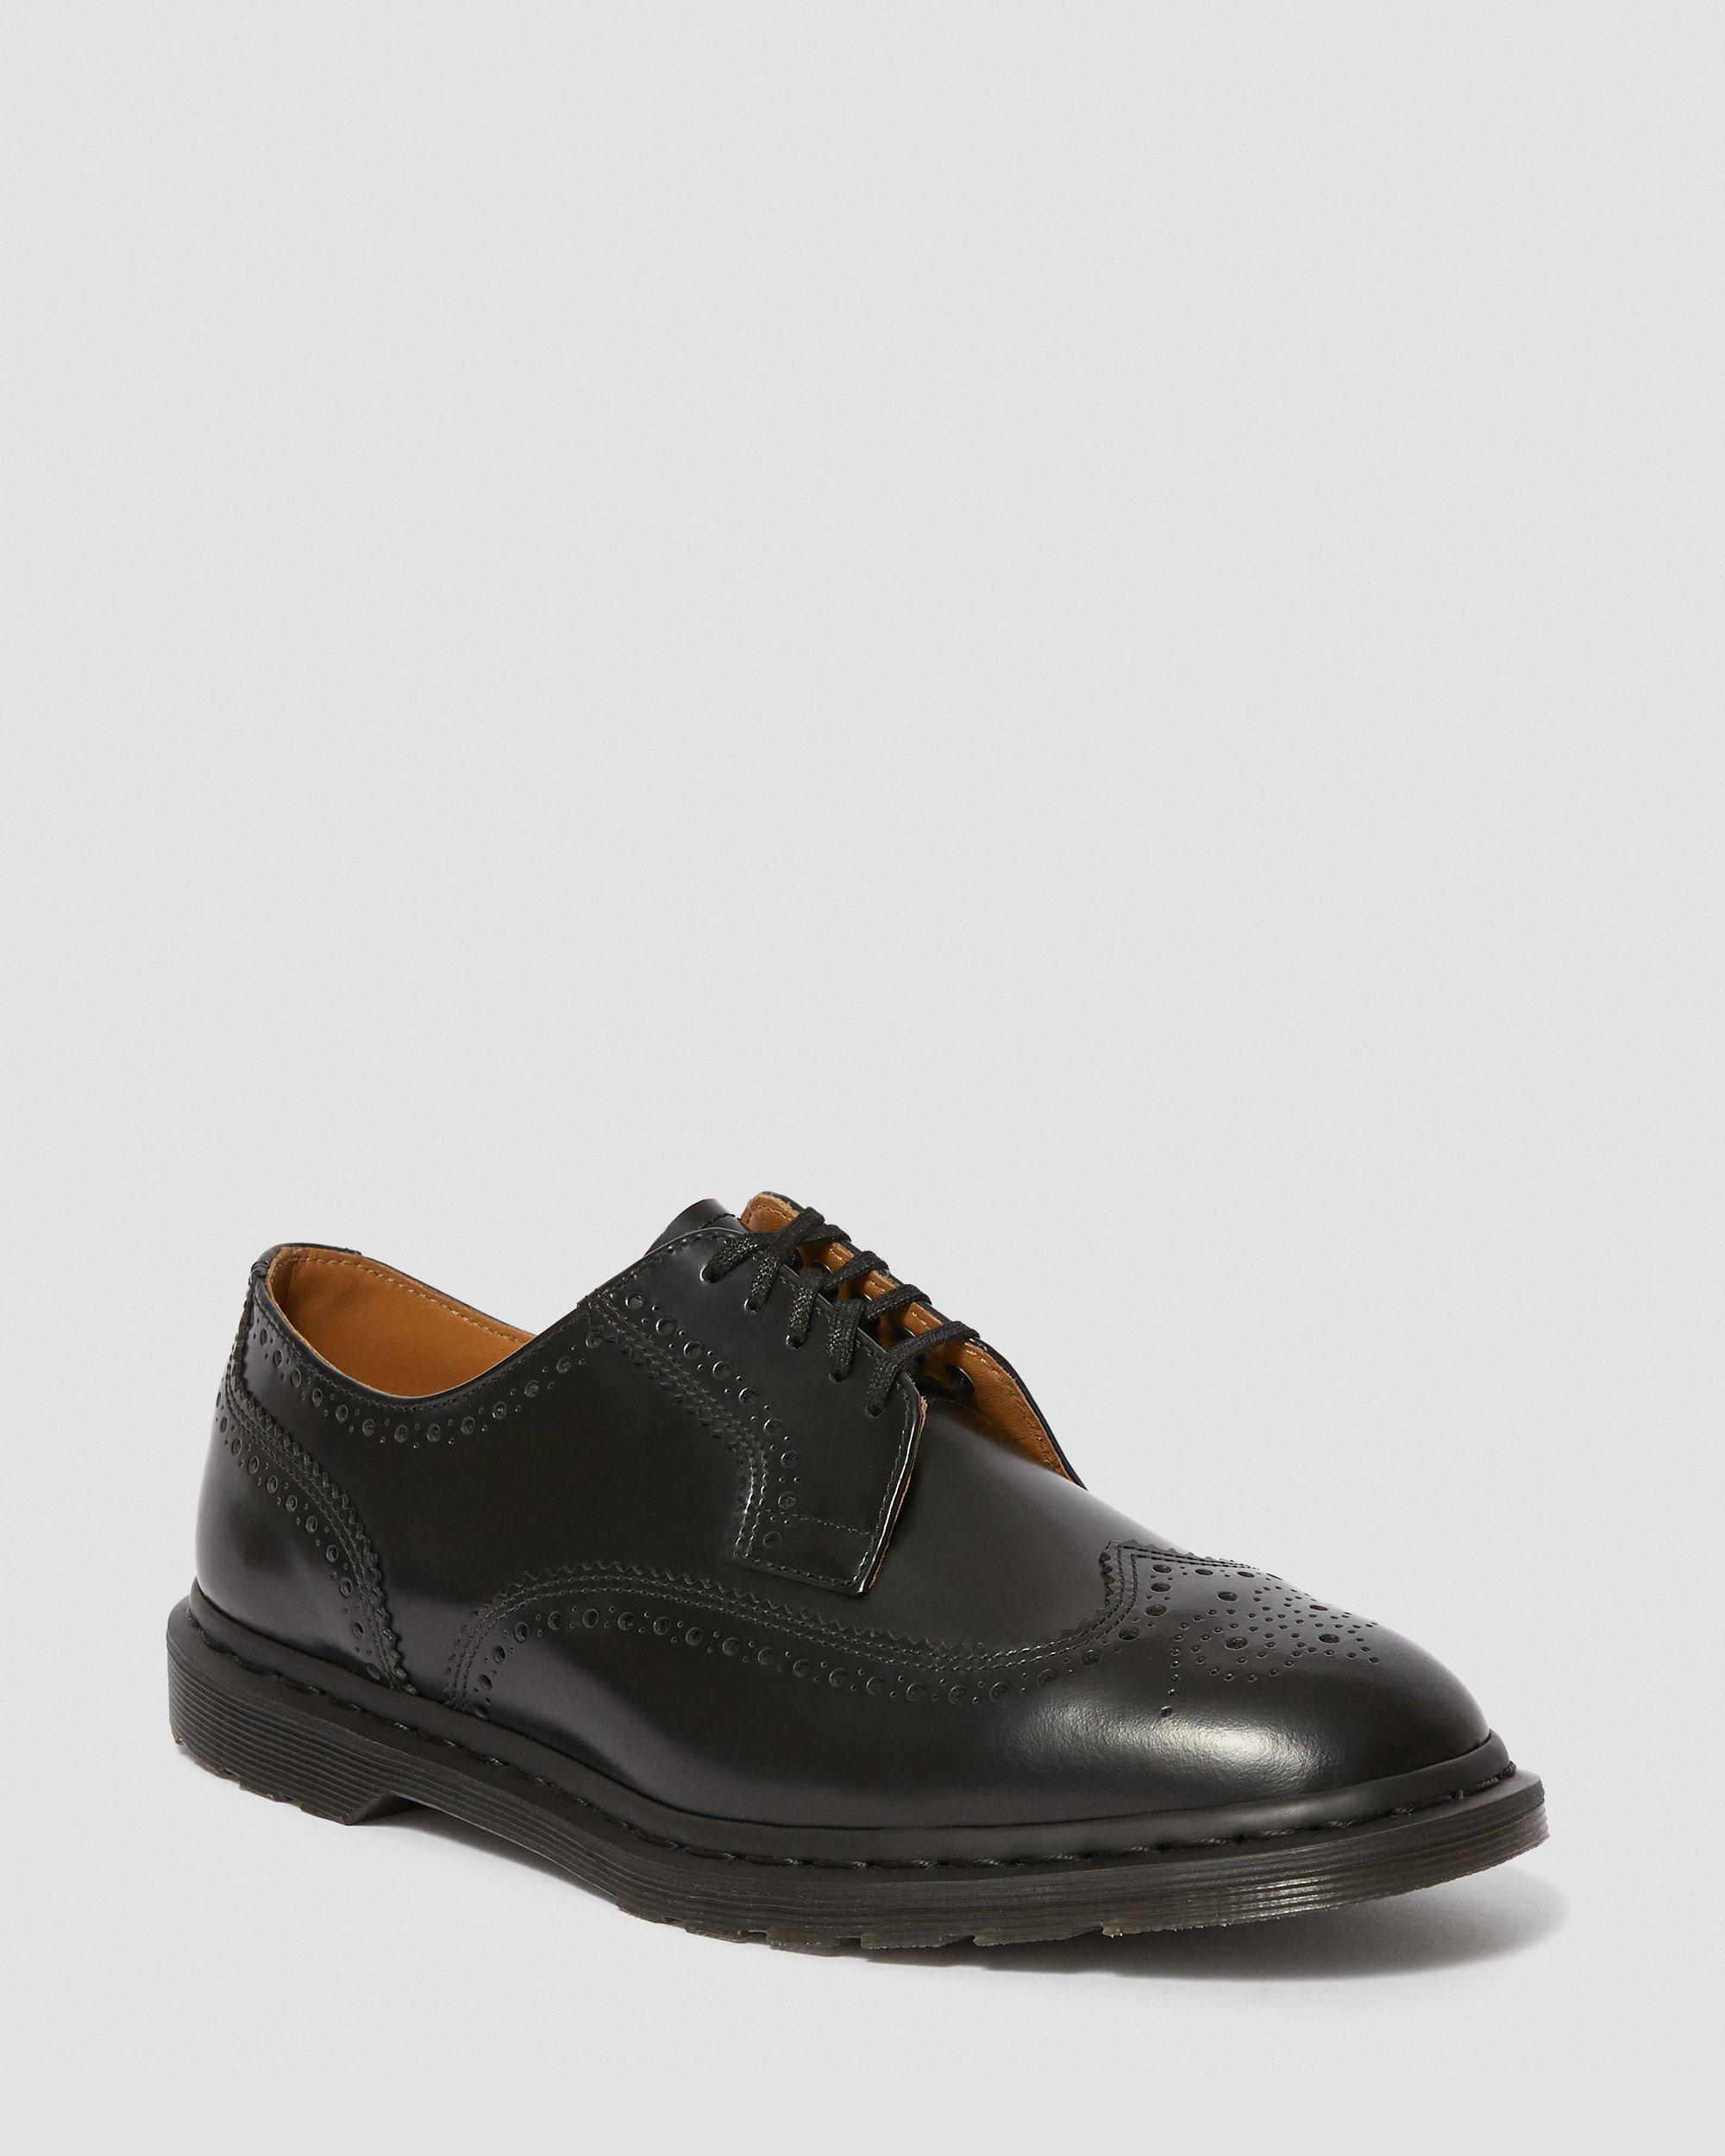 KELVIN II SMOOTH LEATHER BROGUE SHOES 